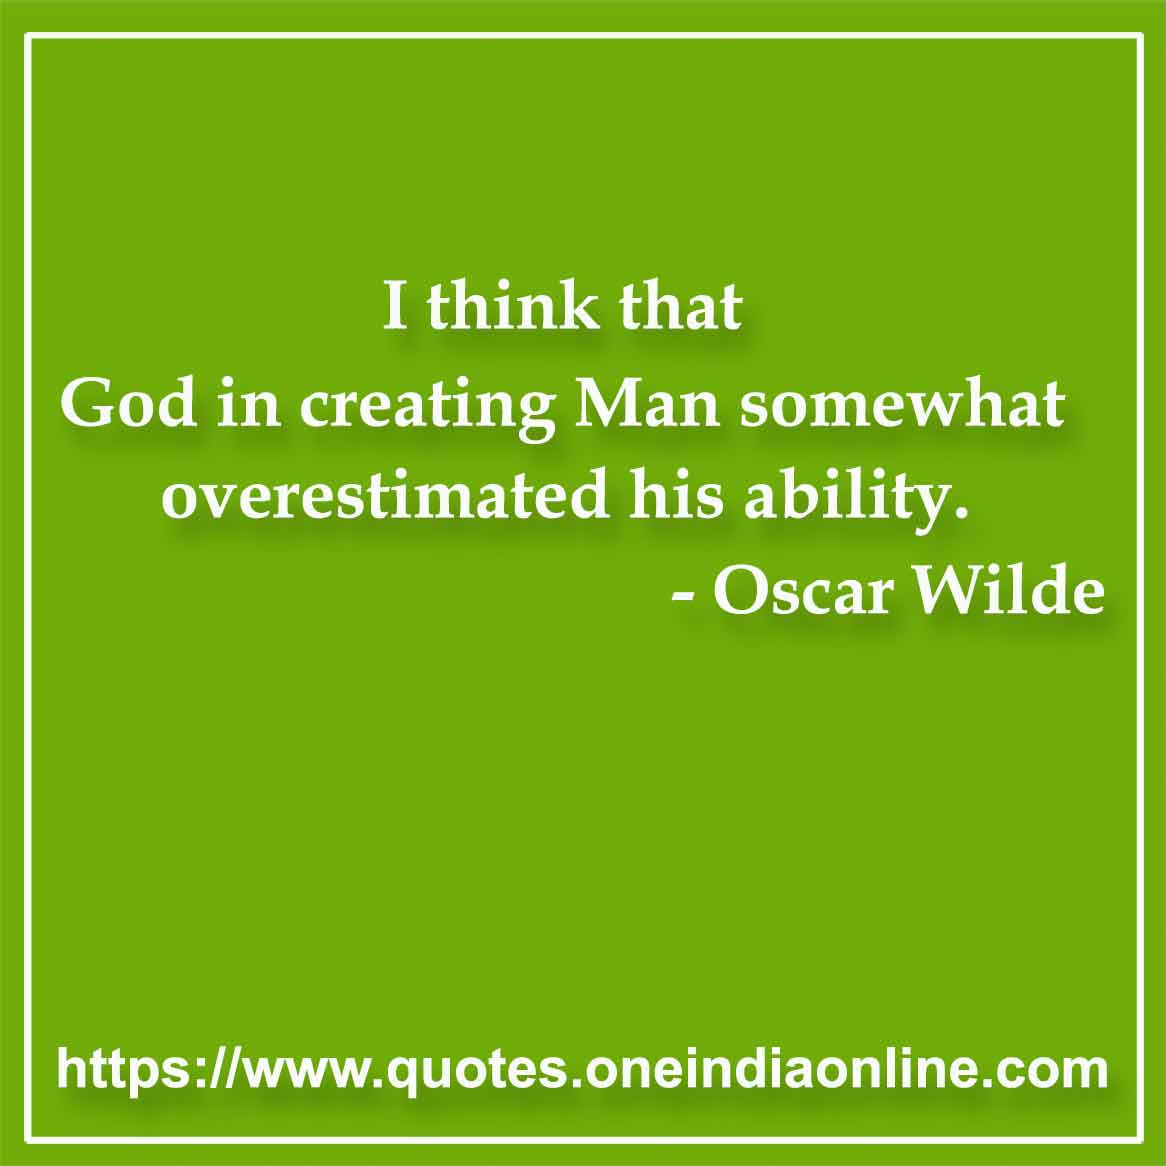 I think that God in creating Man somewhat overestimated his ability.

- Mankind Quotes by Oscar Wilde